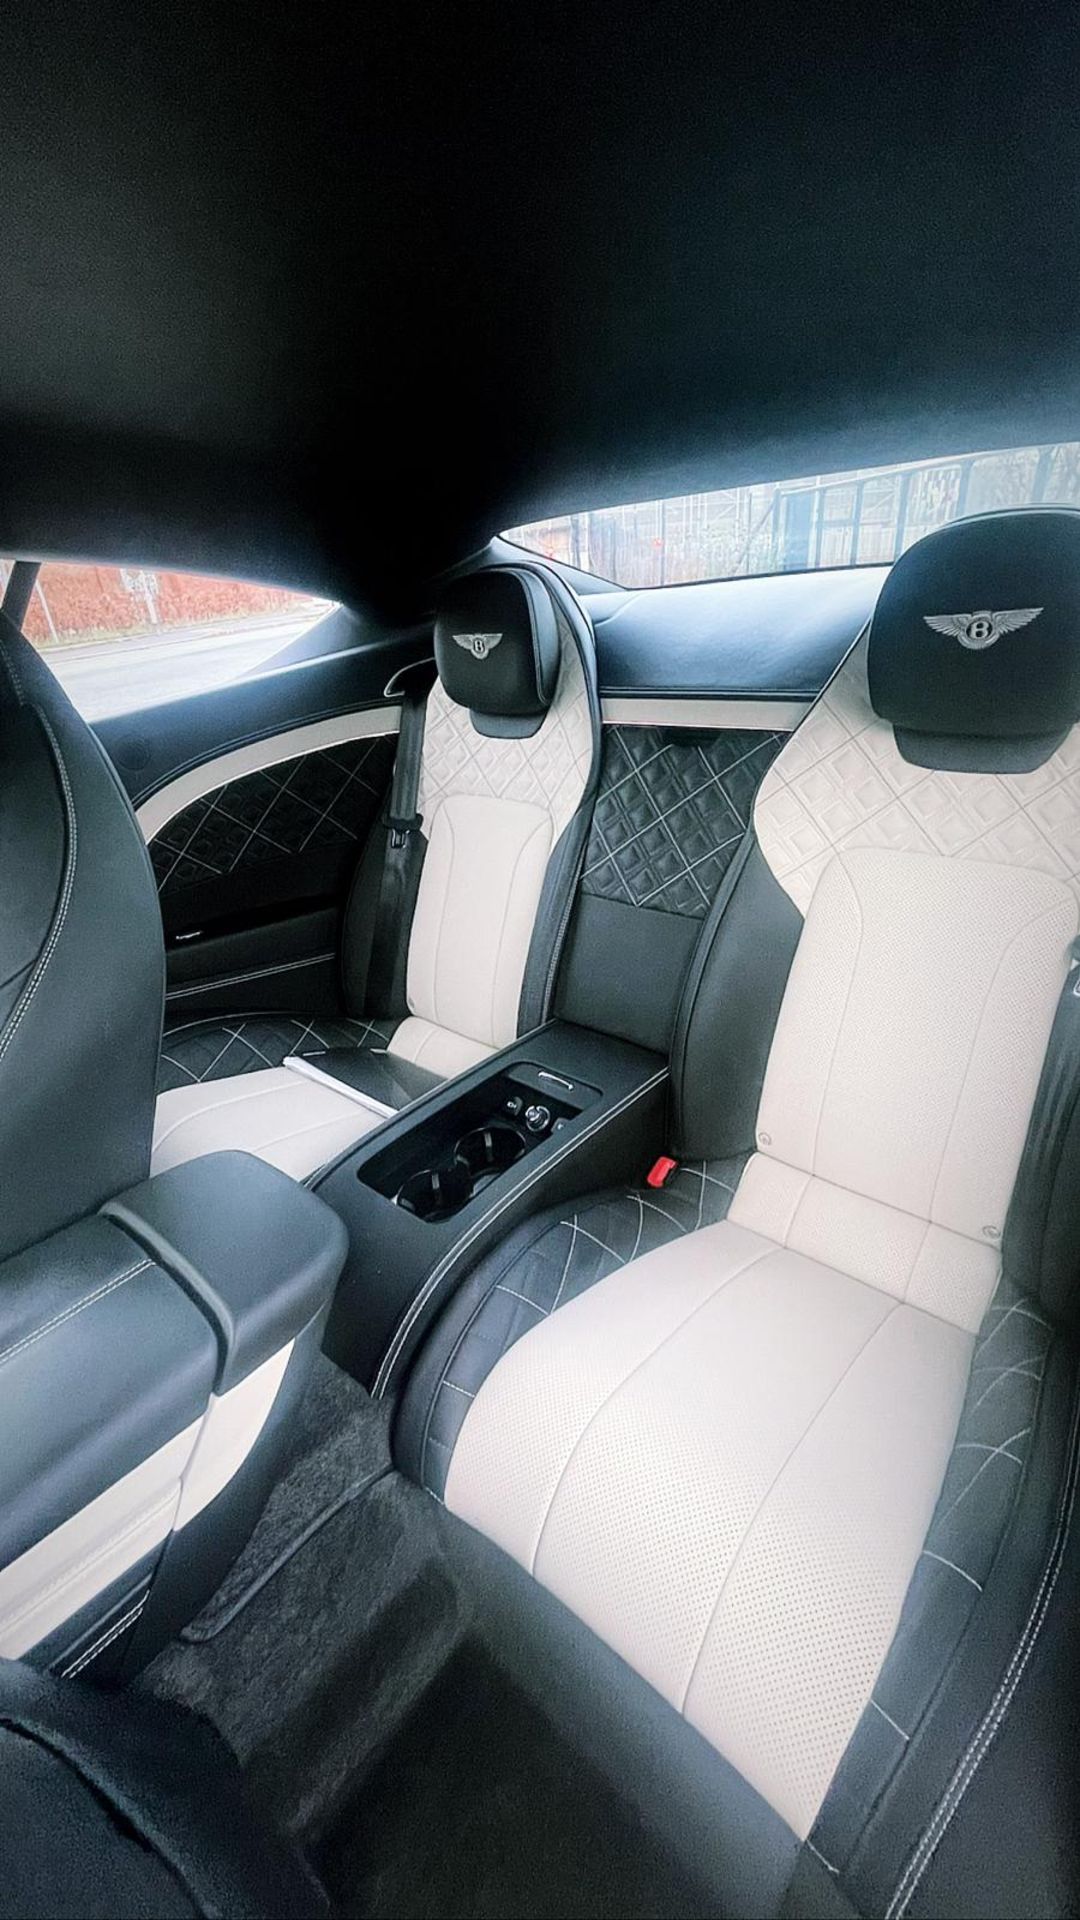 2018 BENTLEY CONTINENTAL GT 6.0 W12 1st EDITION AUTO, COMFORT SEATING, ONLY 8100 MILES *NO VAT* - Image 10 of 14